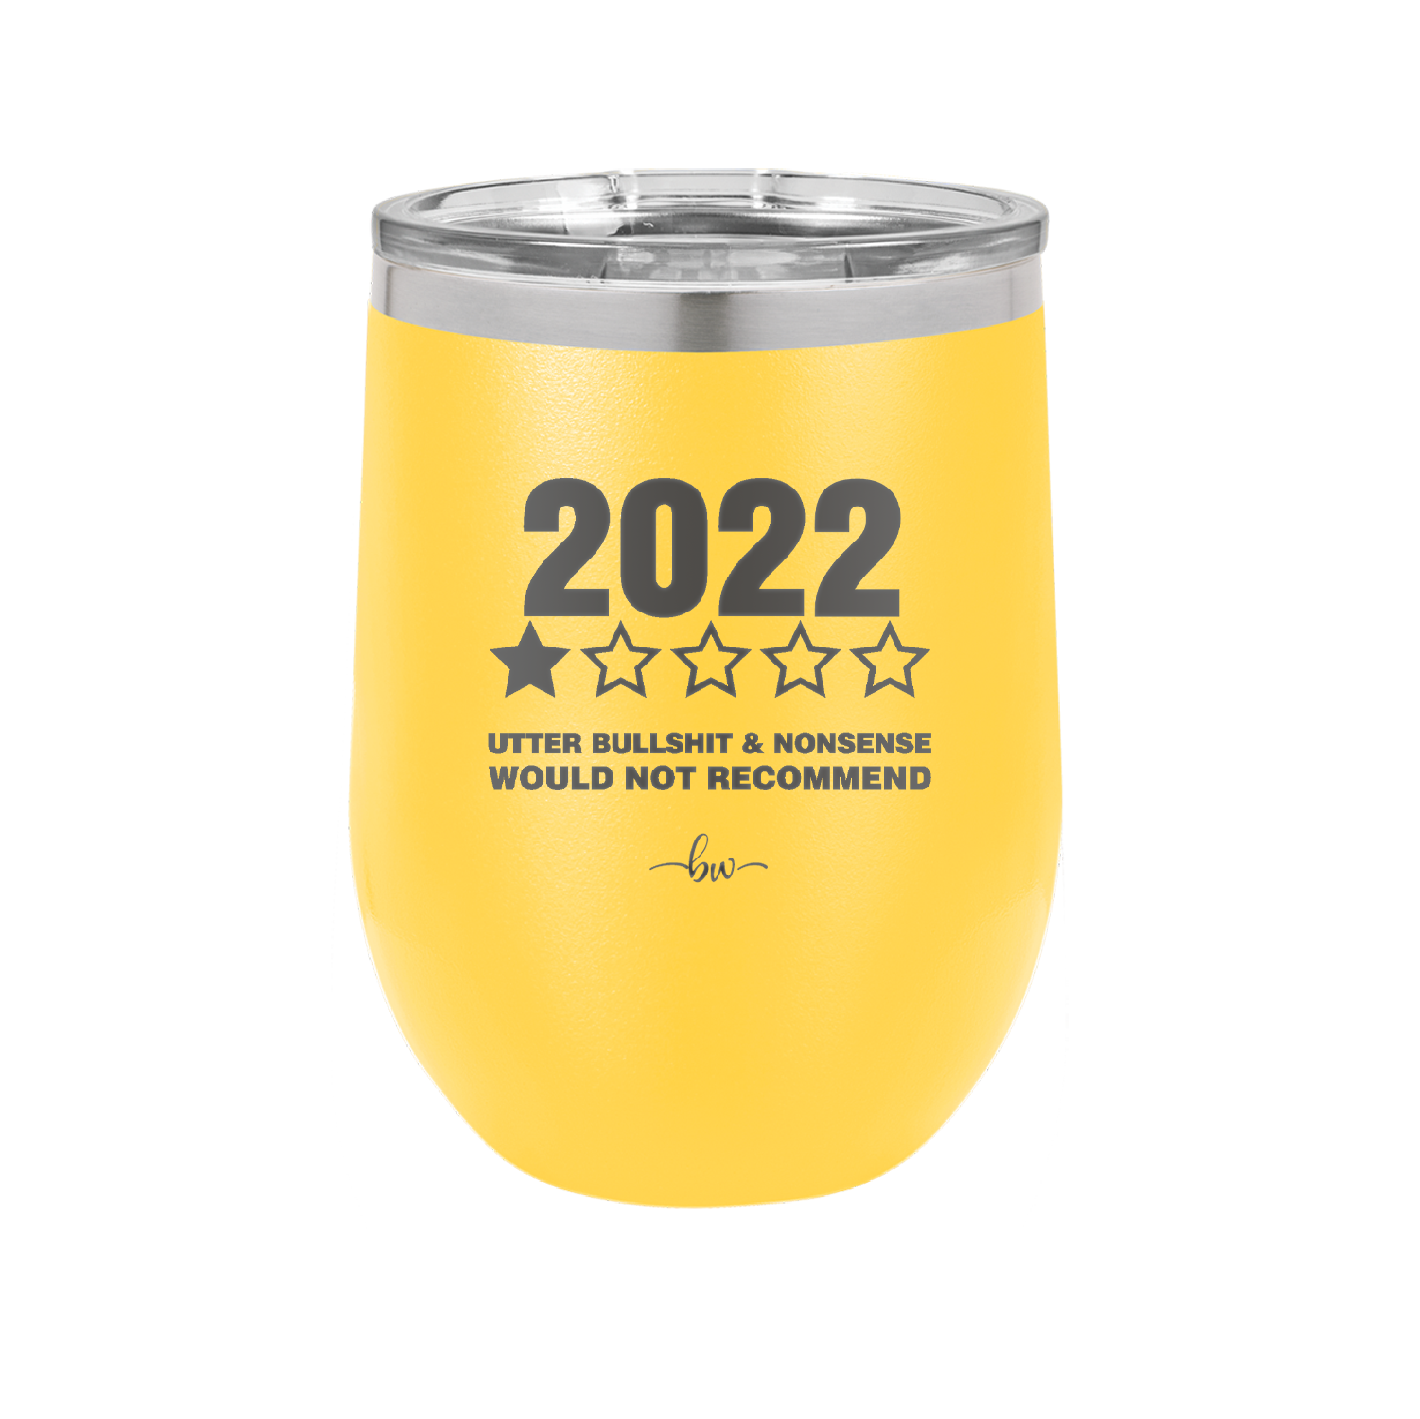 12 oz wine cup 2022 utter bullshitt and nonsense would not recommend - yellow